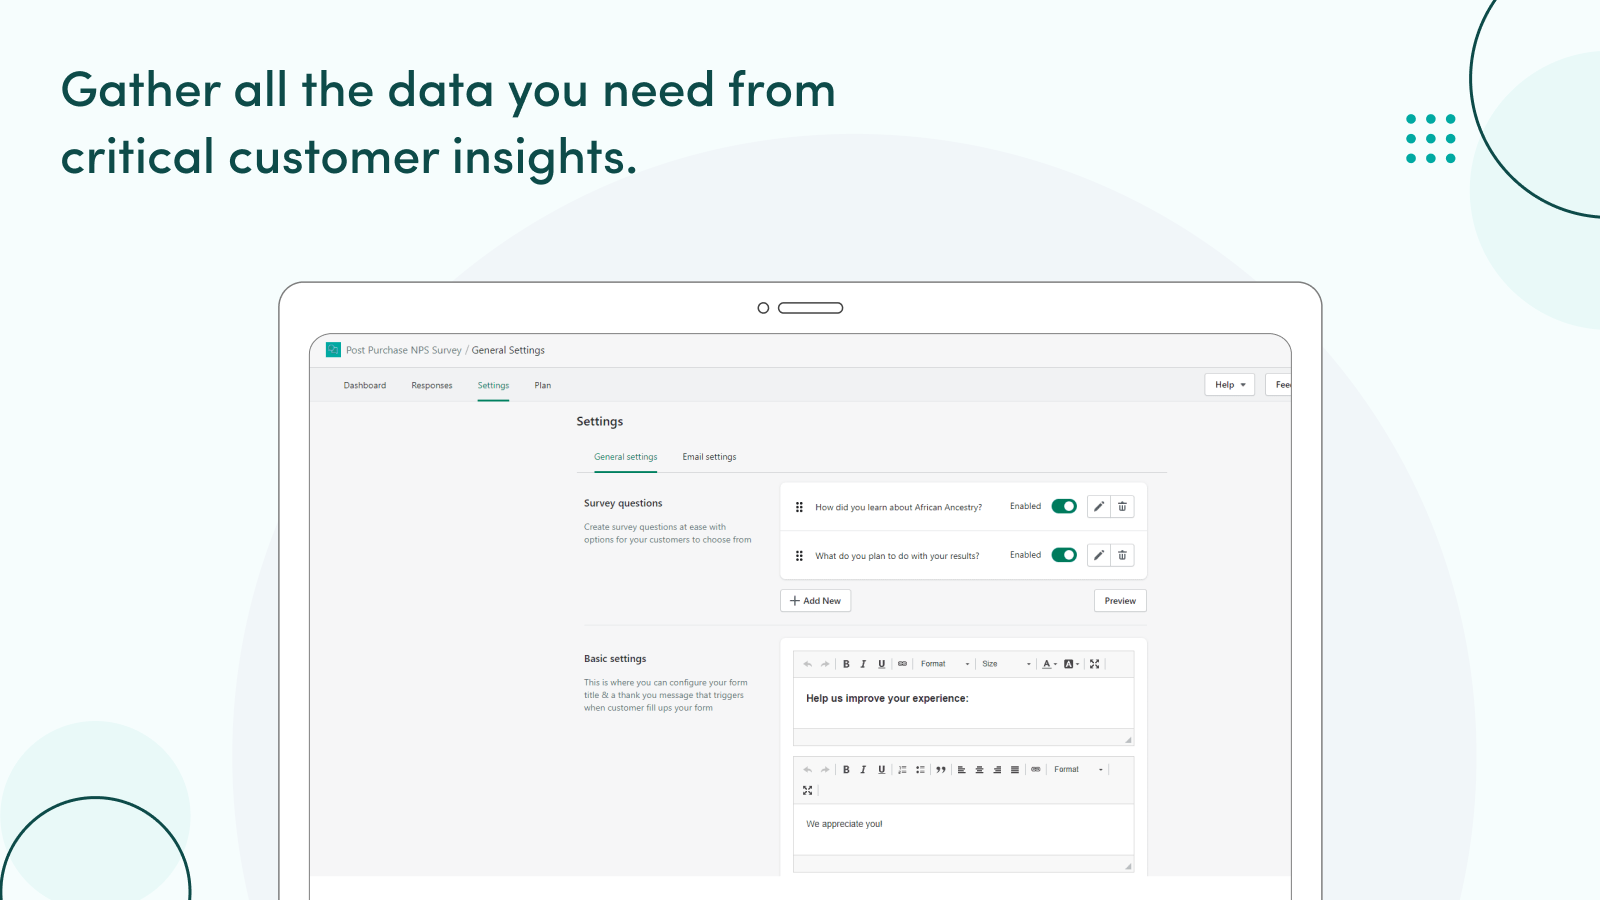 Gather all the relevant data from PPS NPS dashboard analytics.